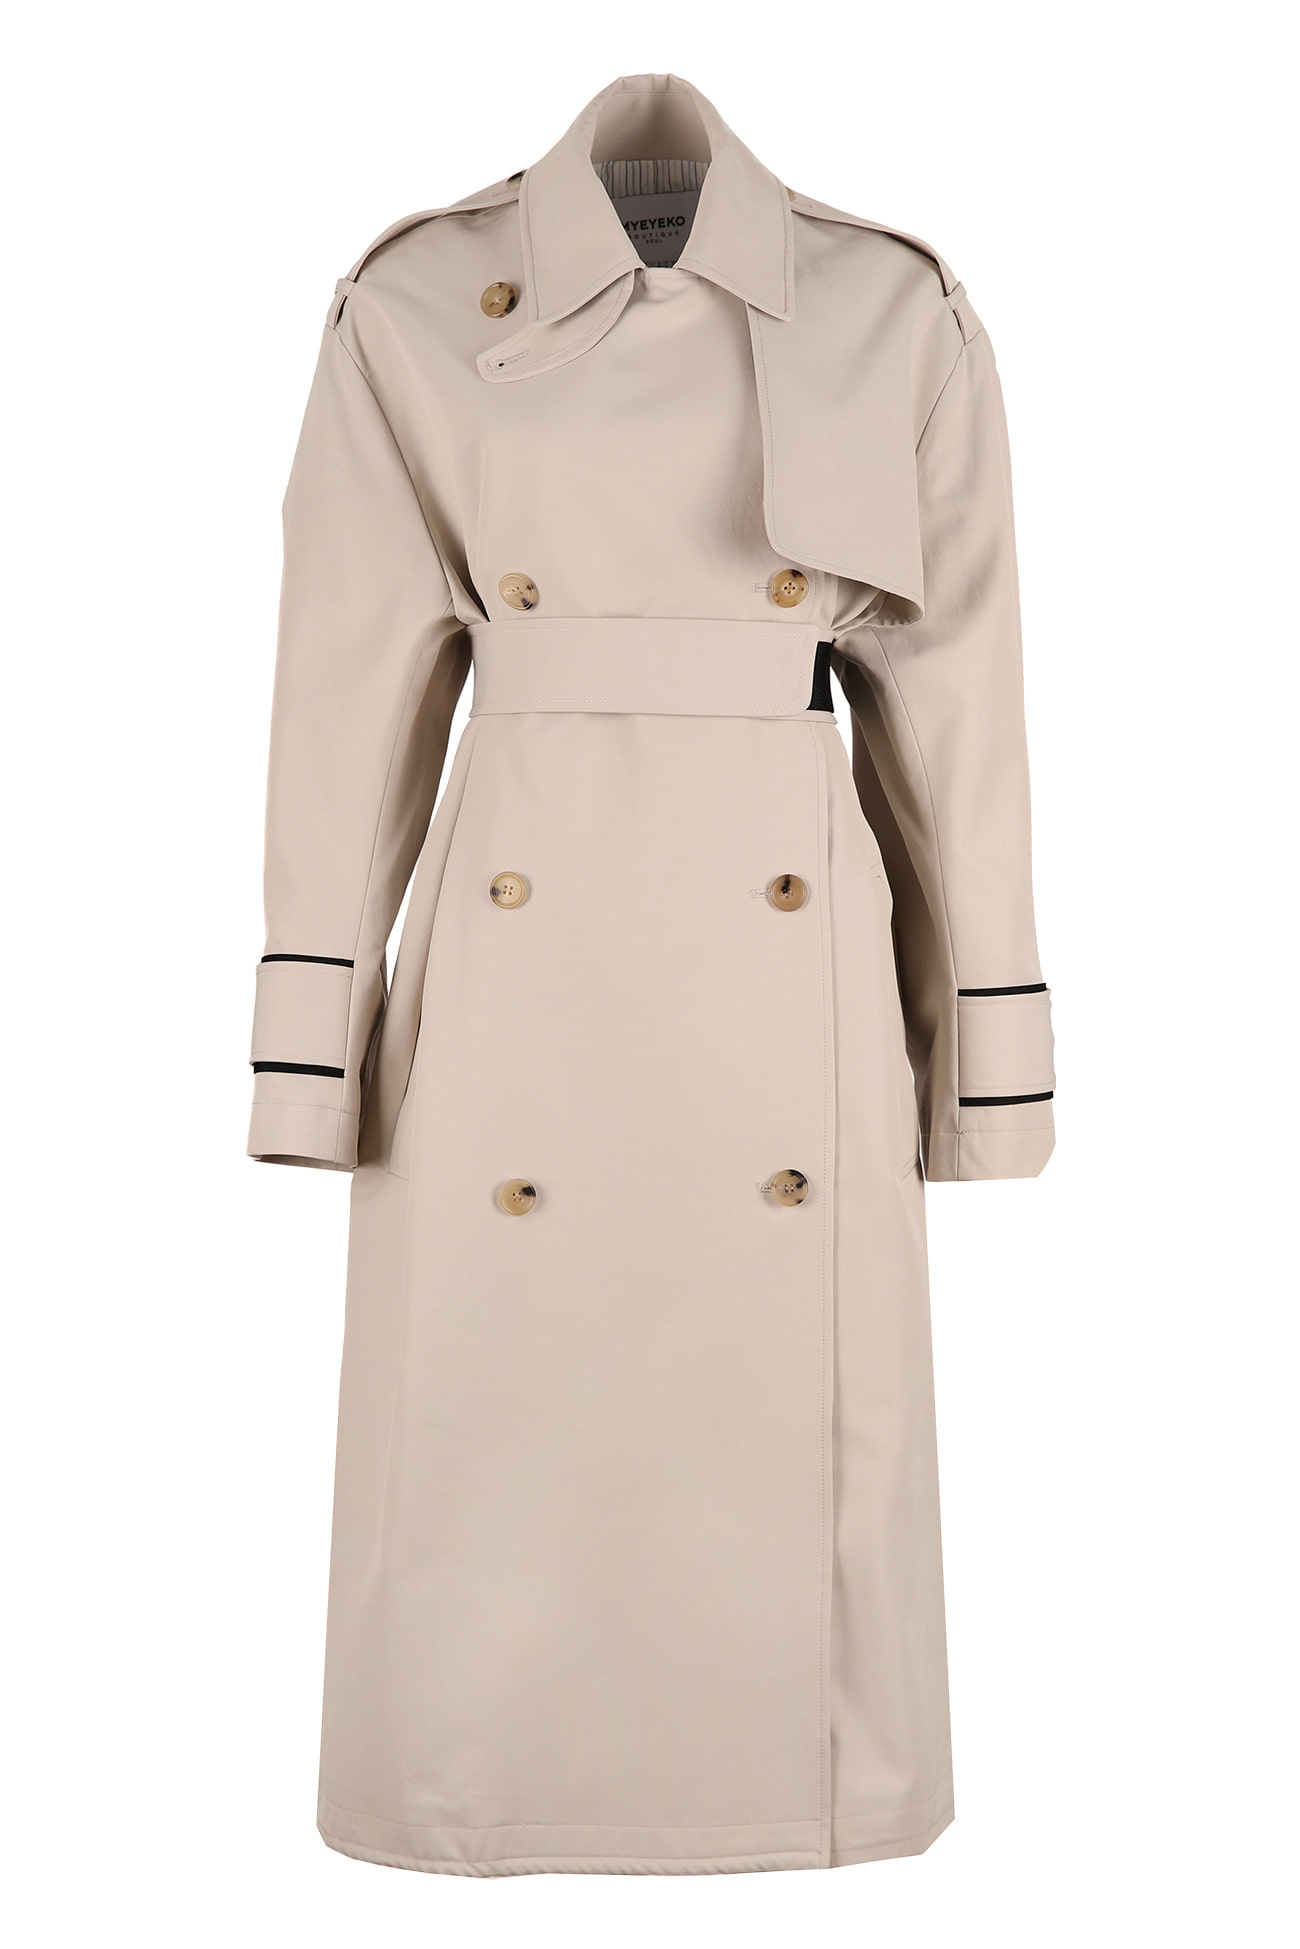 HIGH QUALITY LINE - Spring trench coat collection 베이지